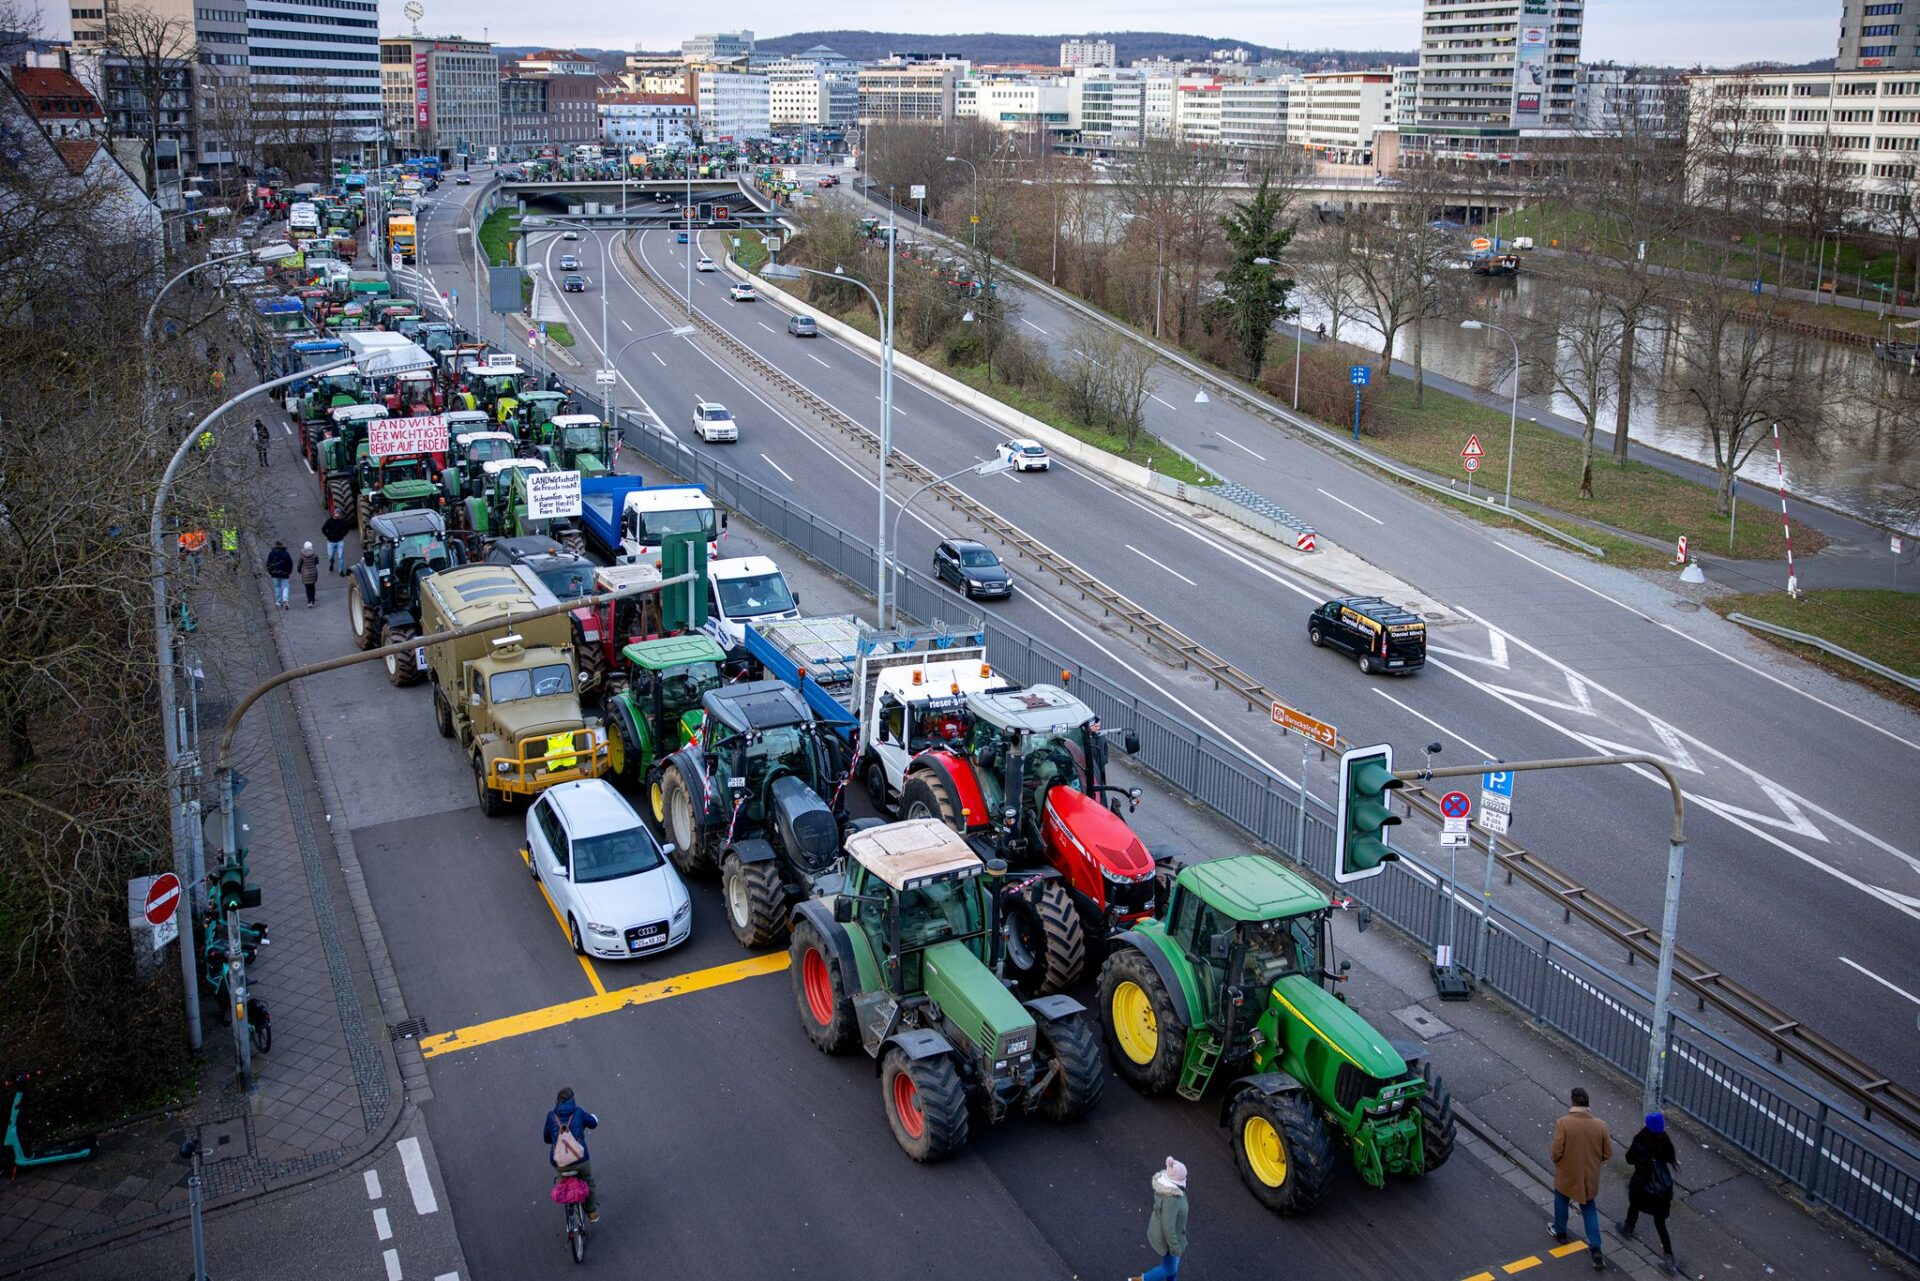 Price crisis sees angry farmers across Europe, unhappiness with EU agricultural laws 